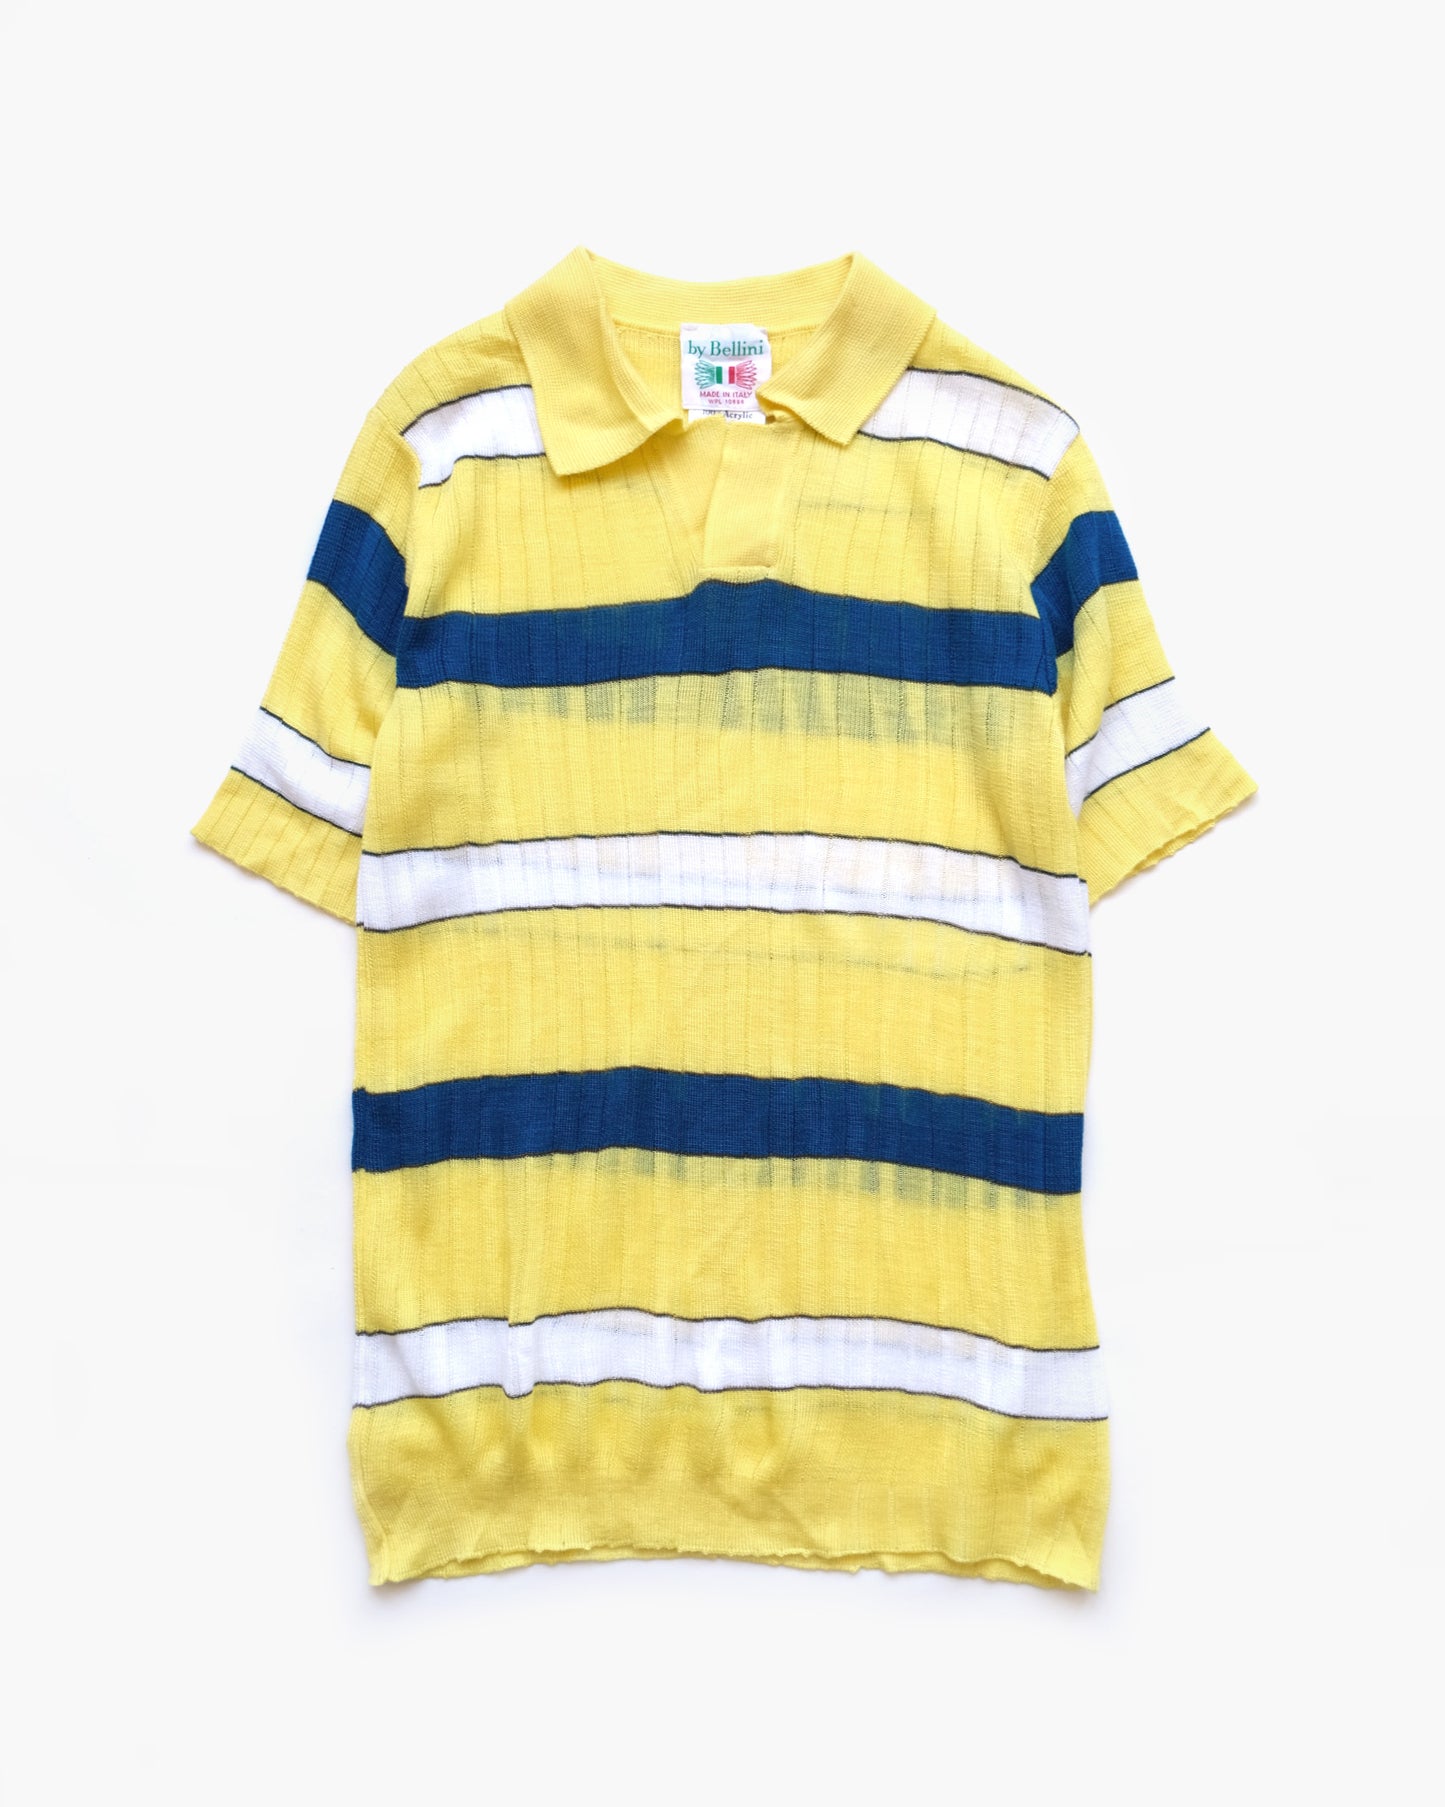 Design Acrylic Knit Polo Made in Italy